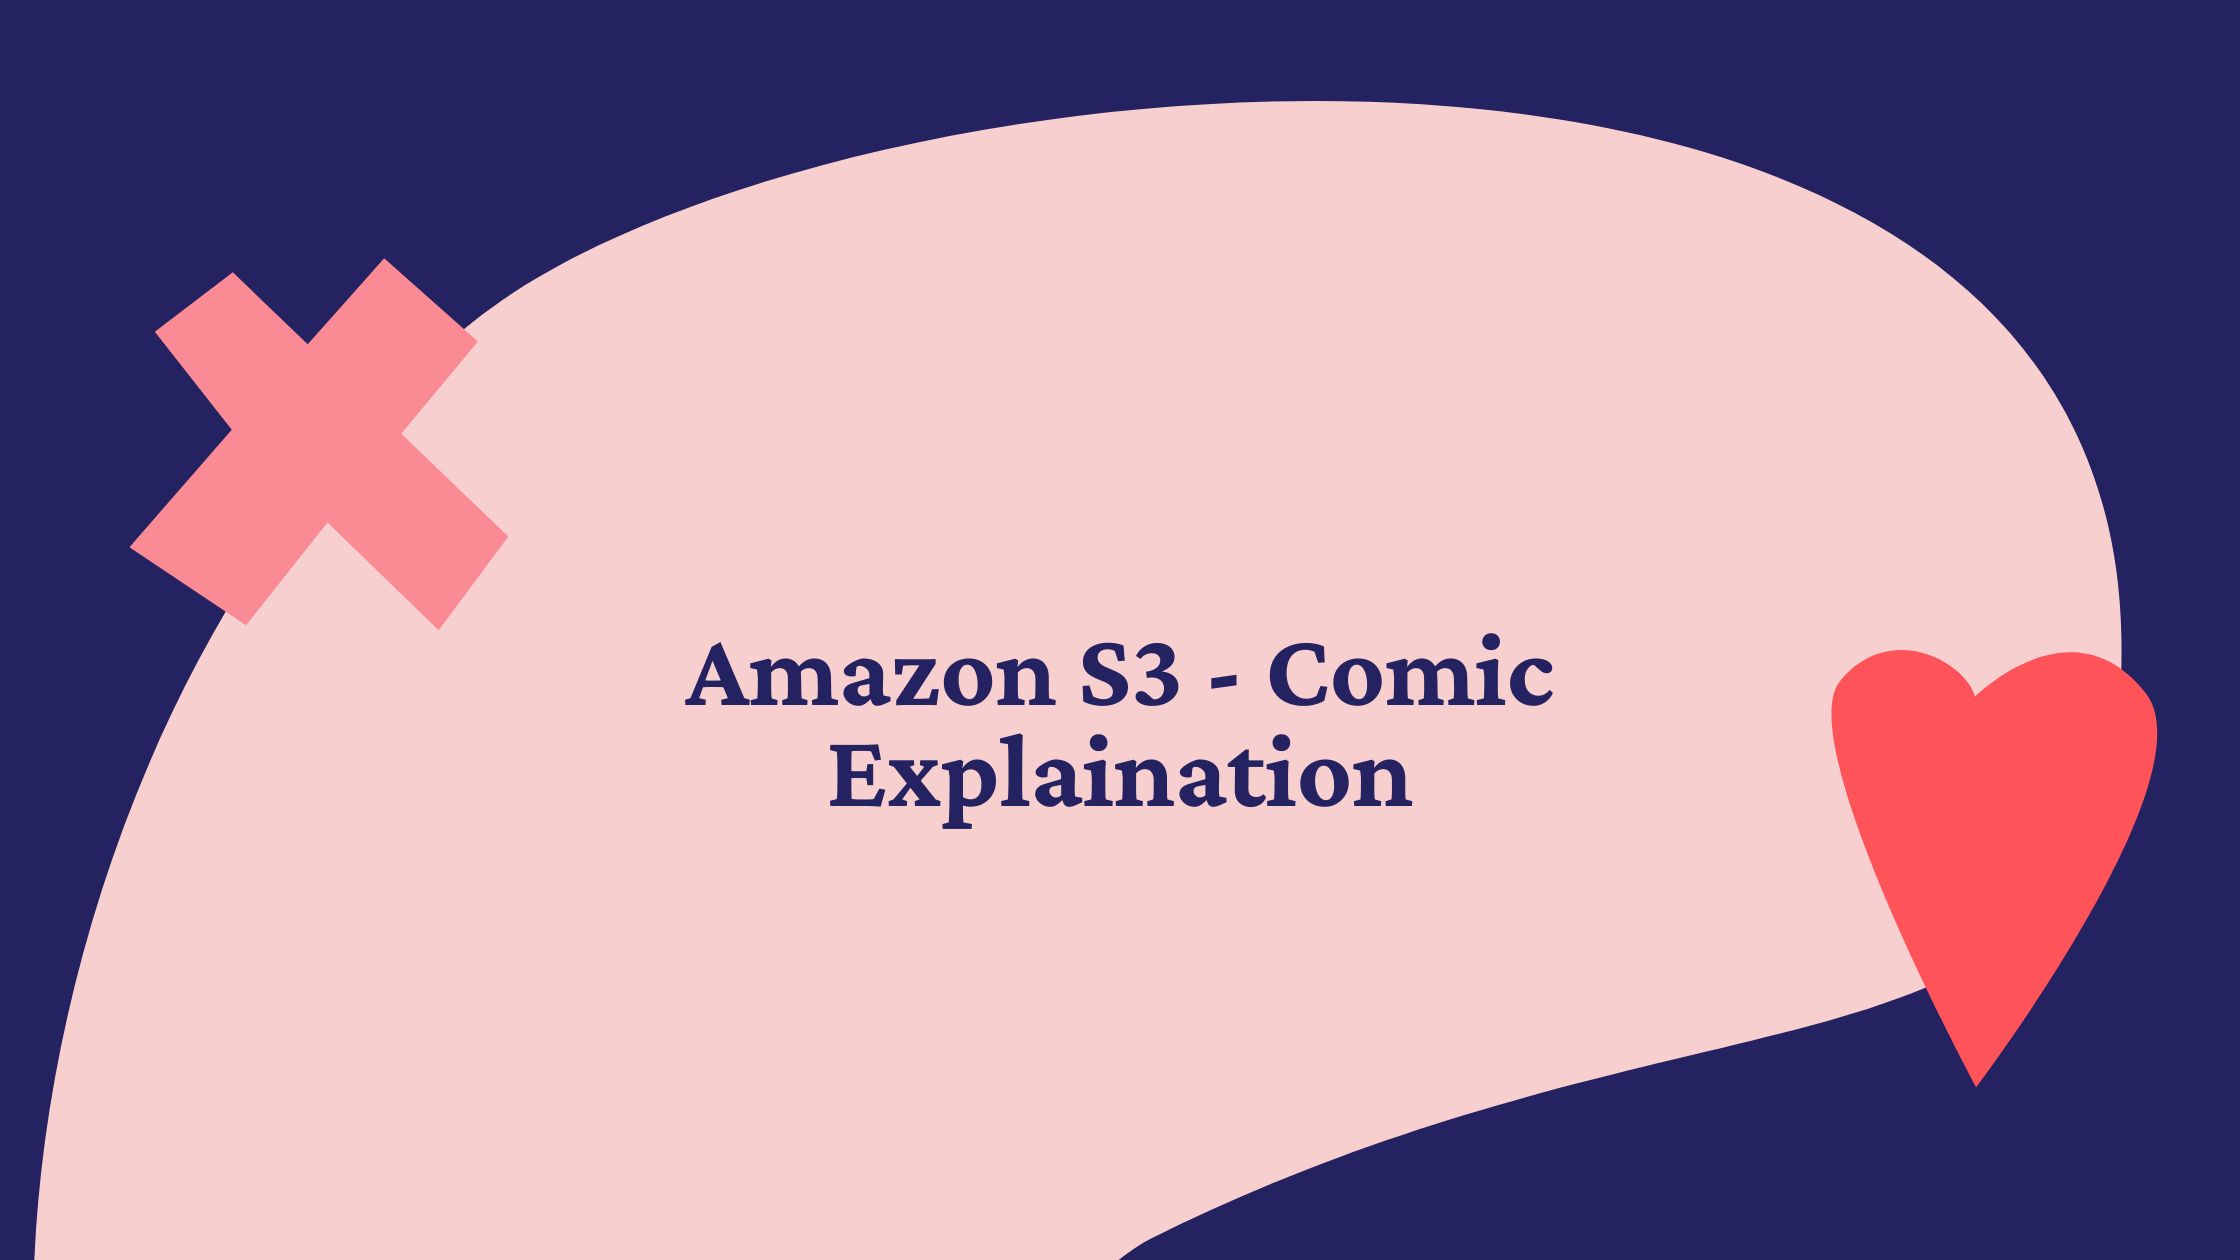 /the-benefits-of-amazon-s3-explained-through-a-comic-nw333w1y feature image